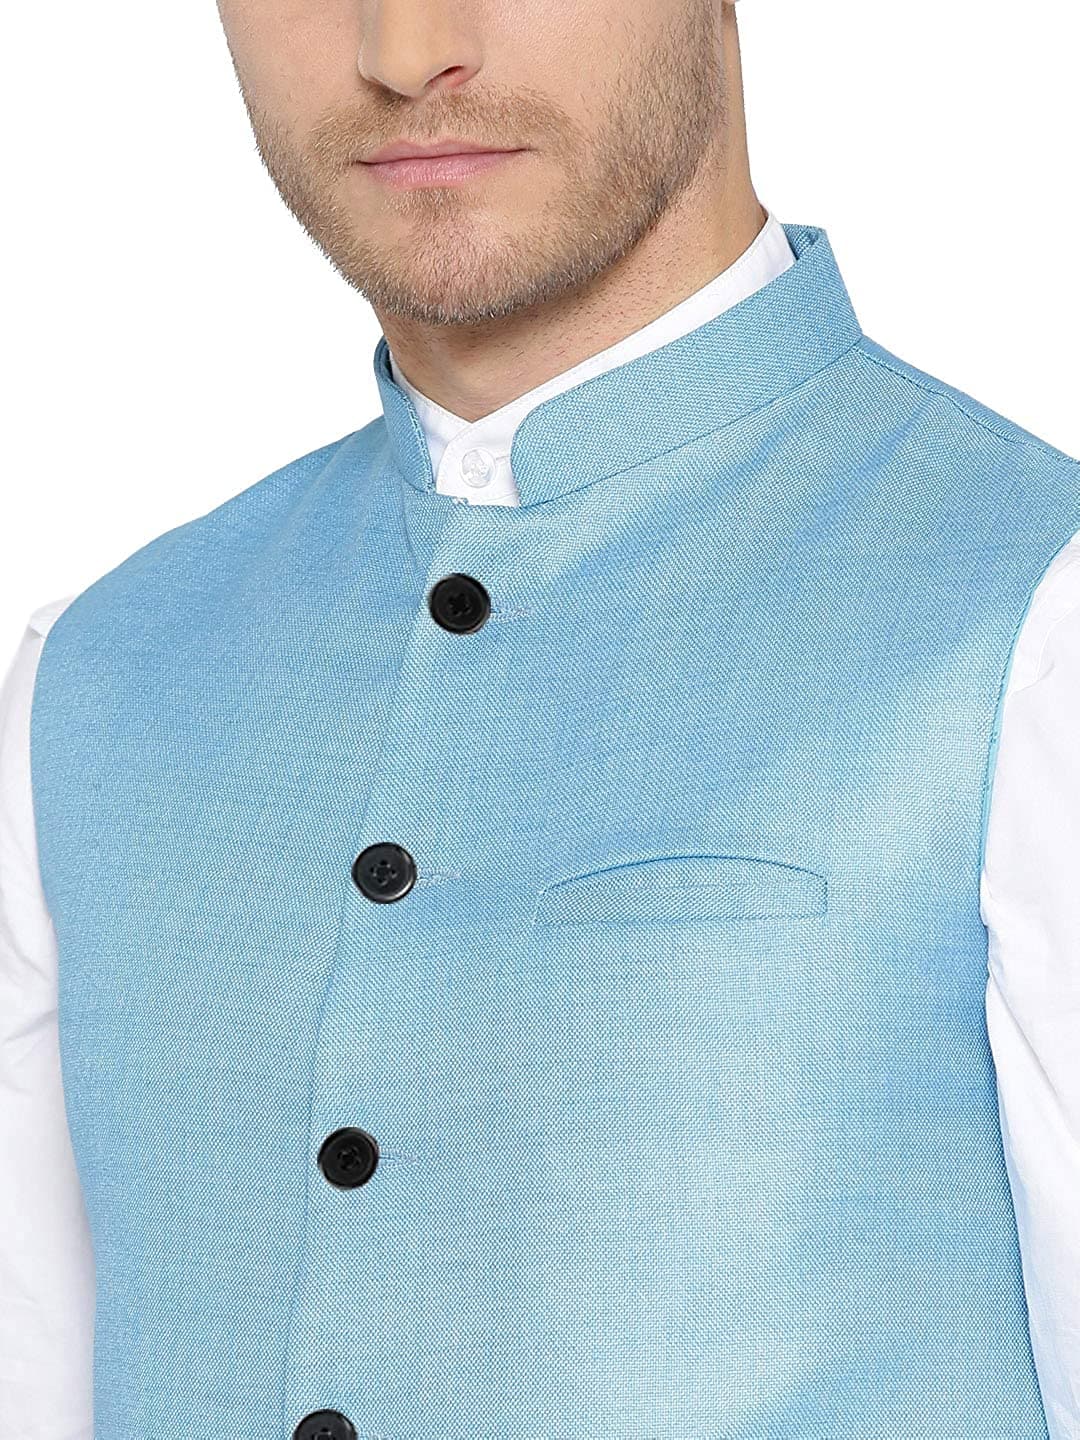 Sky Blue Cotton-Blended Indian Traditional Nehru Jacket Ethnic Waistcoat